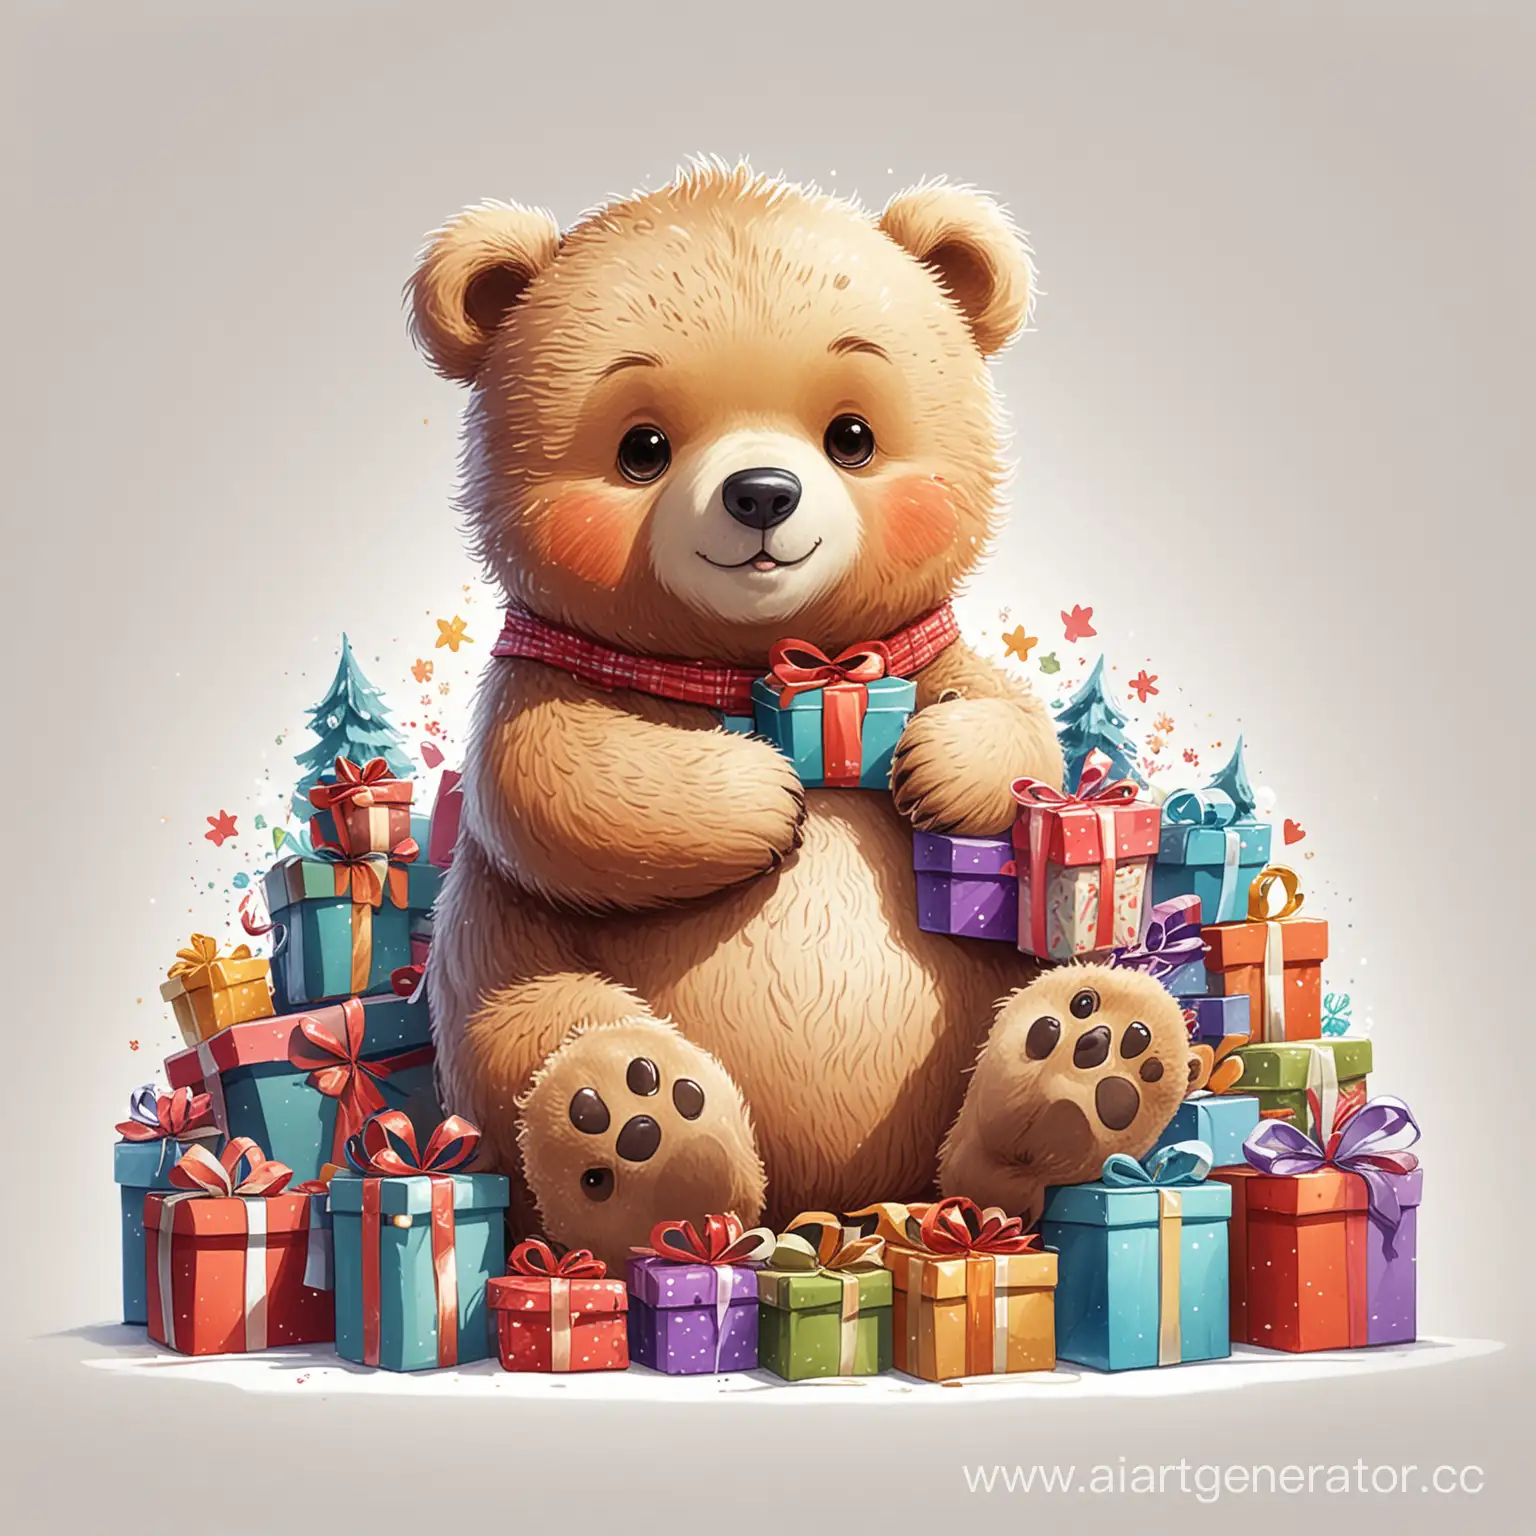 Adorable-Cartoon-Bear-Surrounded-by-a-Pile-of-Gifts-on-White-Background